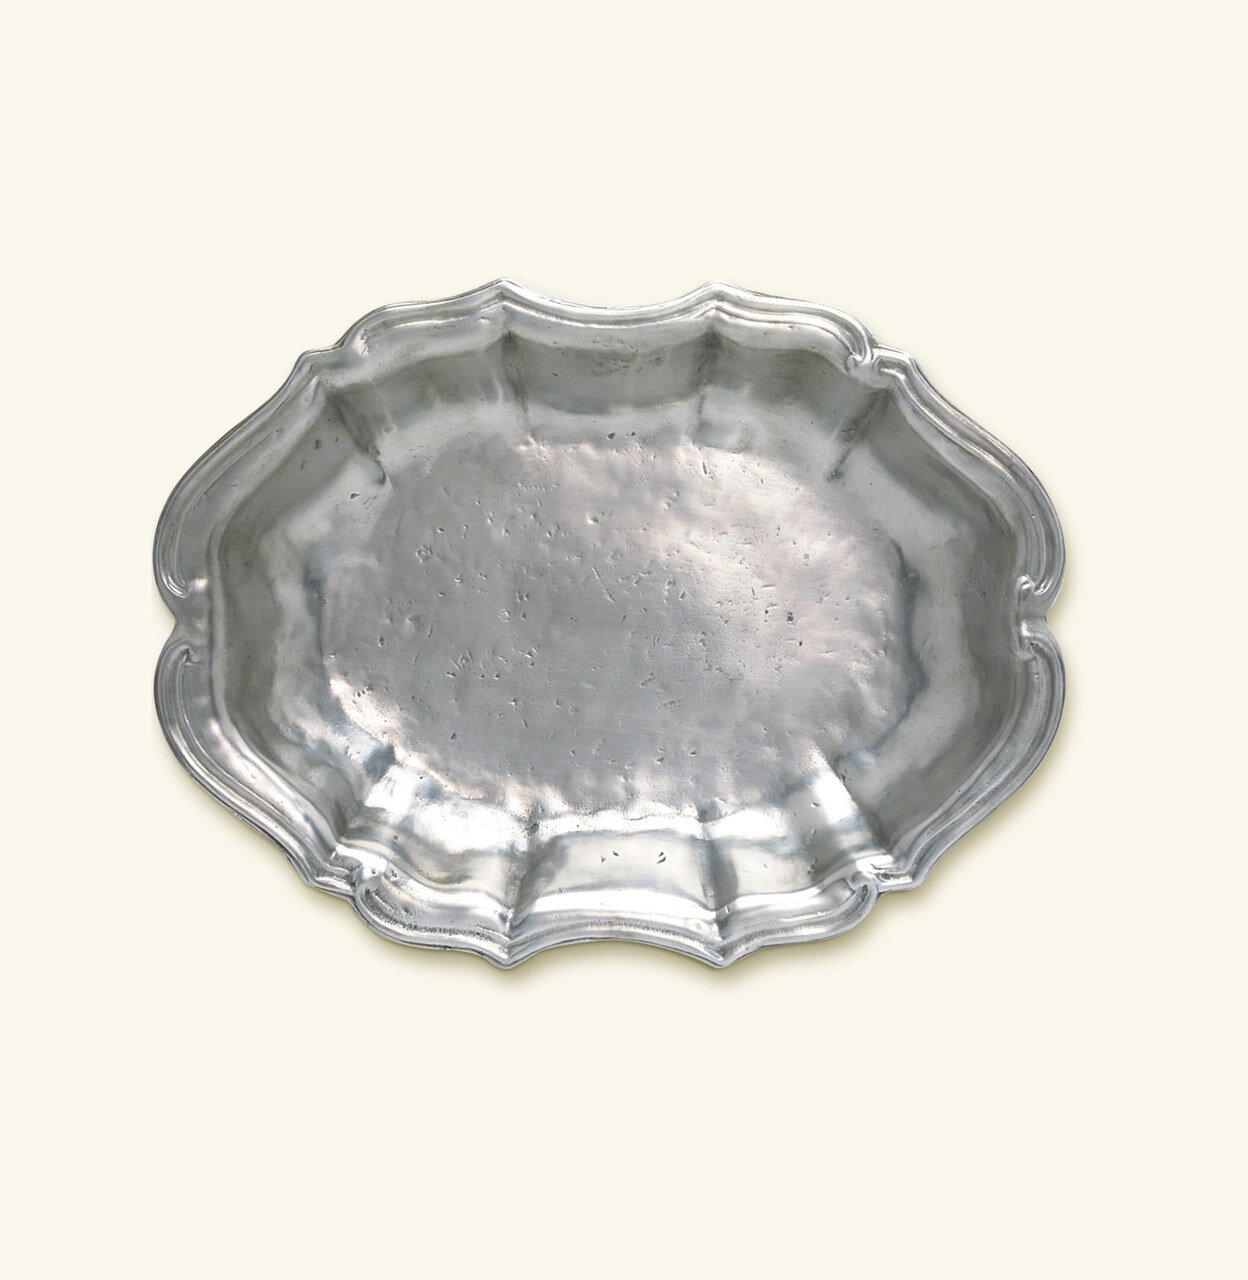 Match Pewter Queen Anne Oval Bowl a144.0